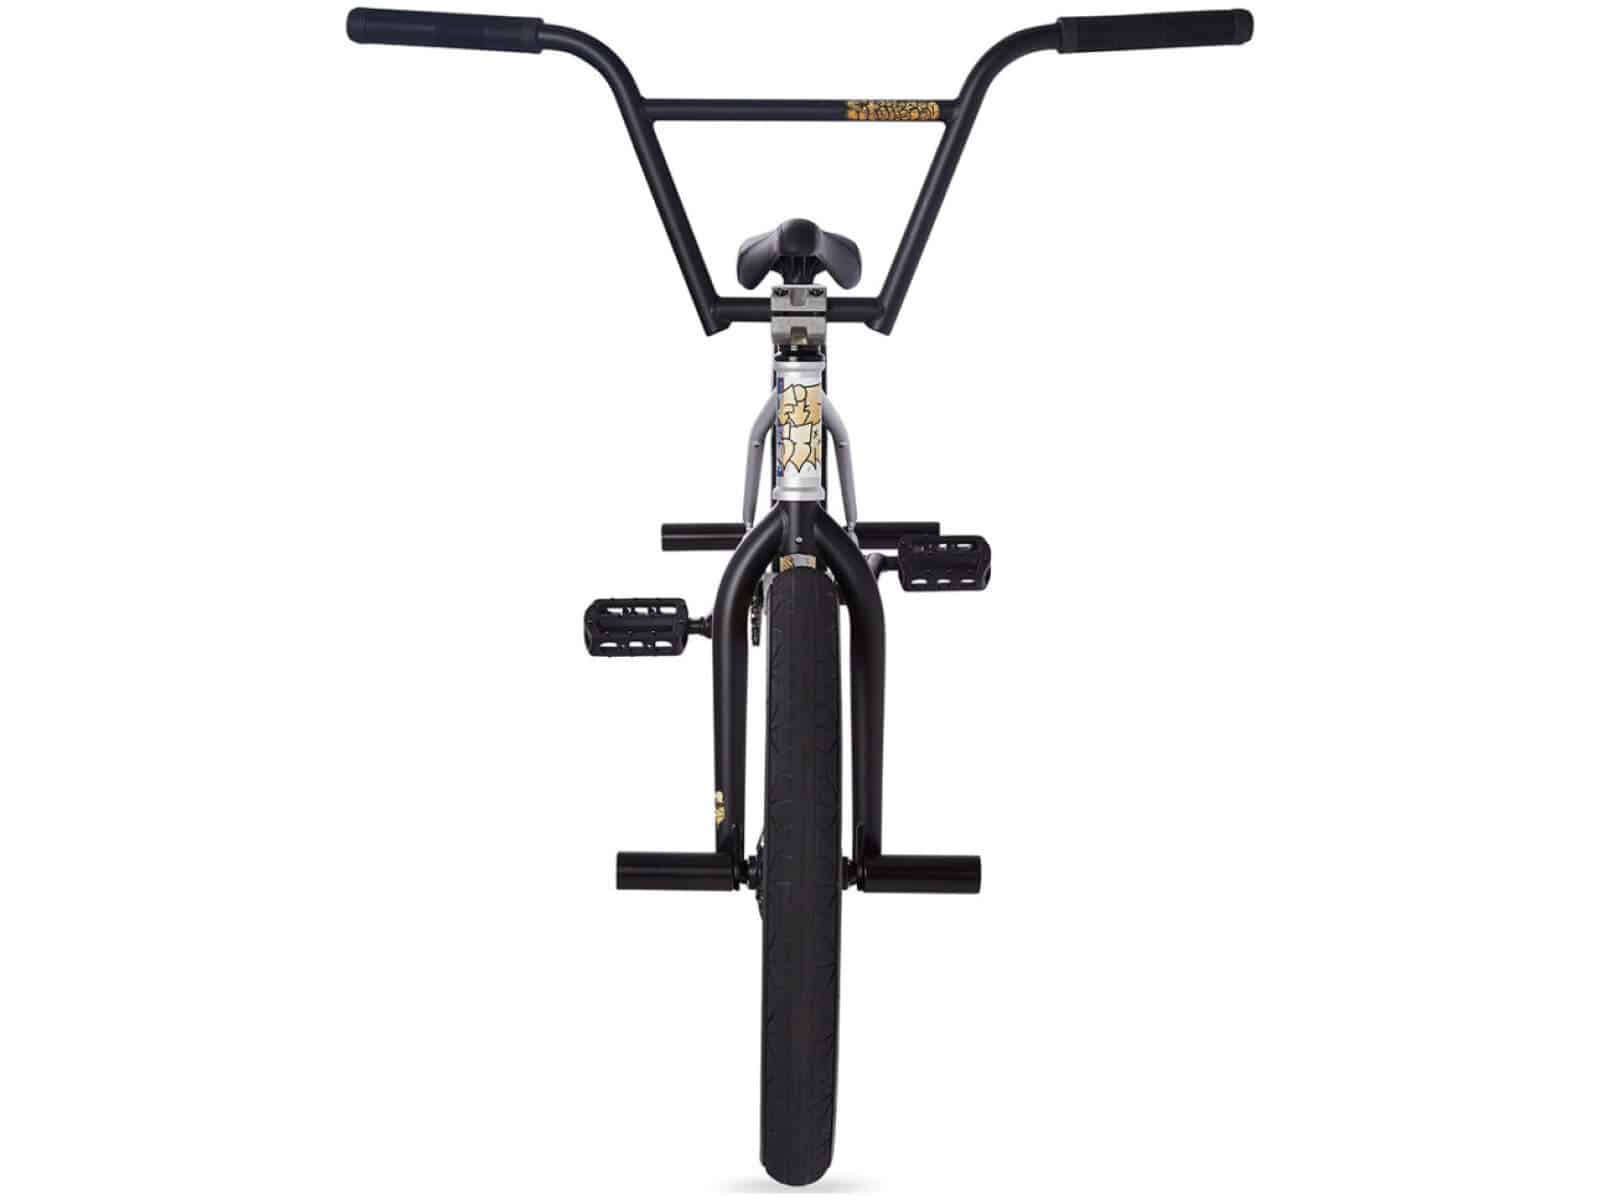 Fitbikeco STR FREECOASTER